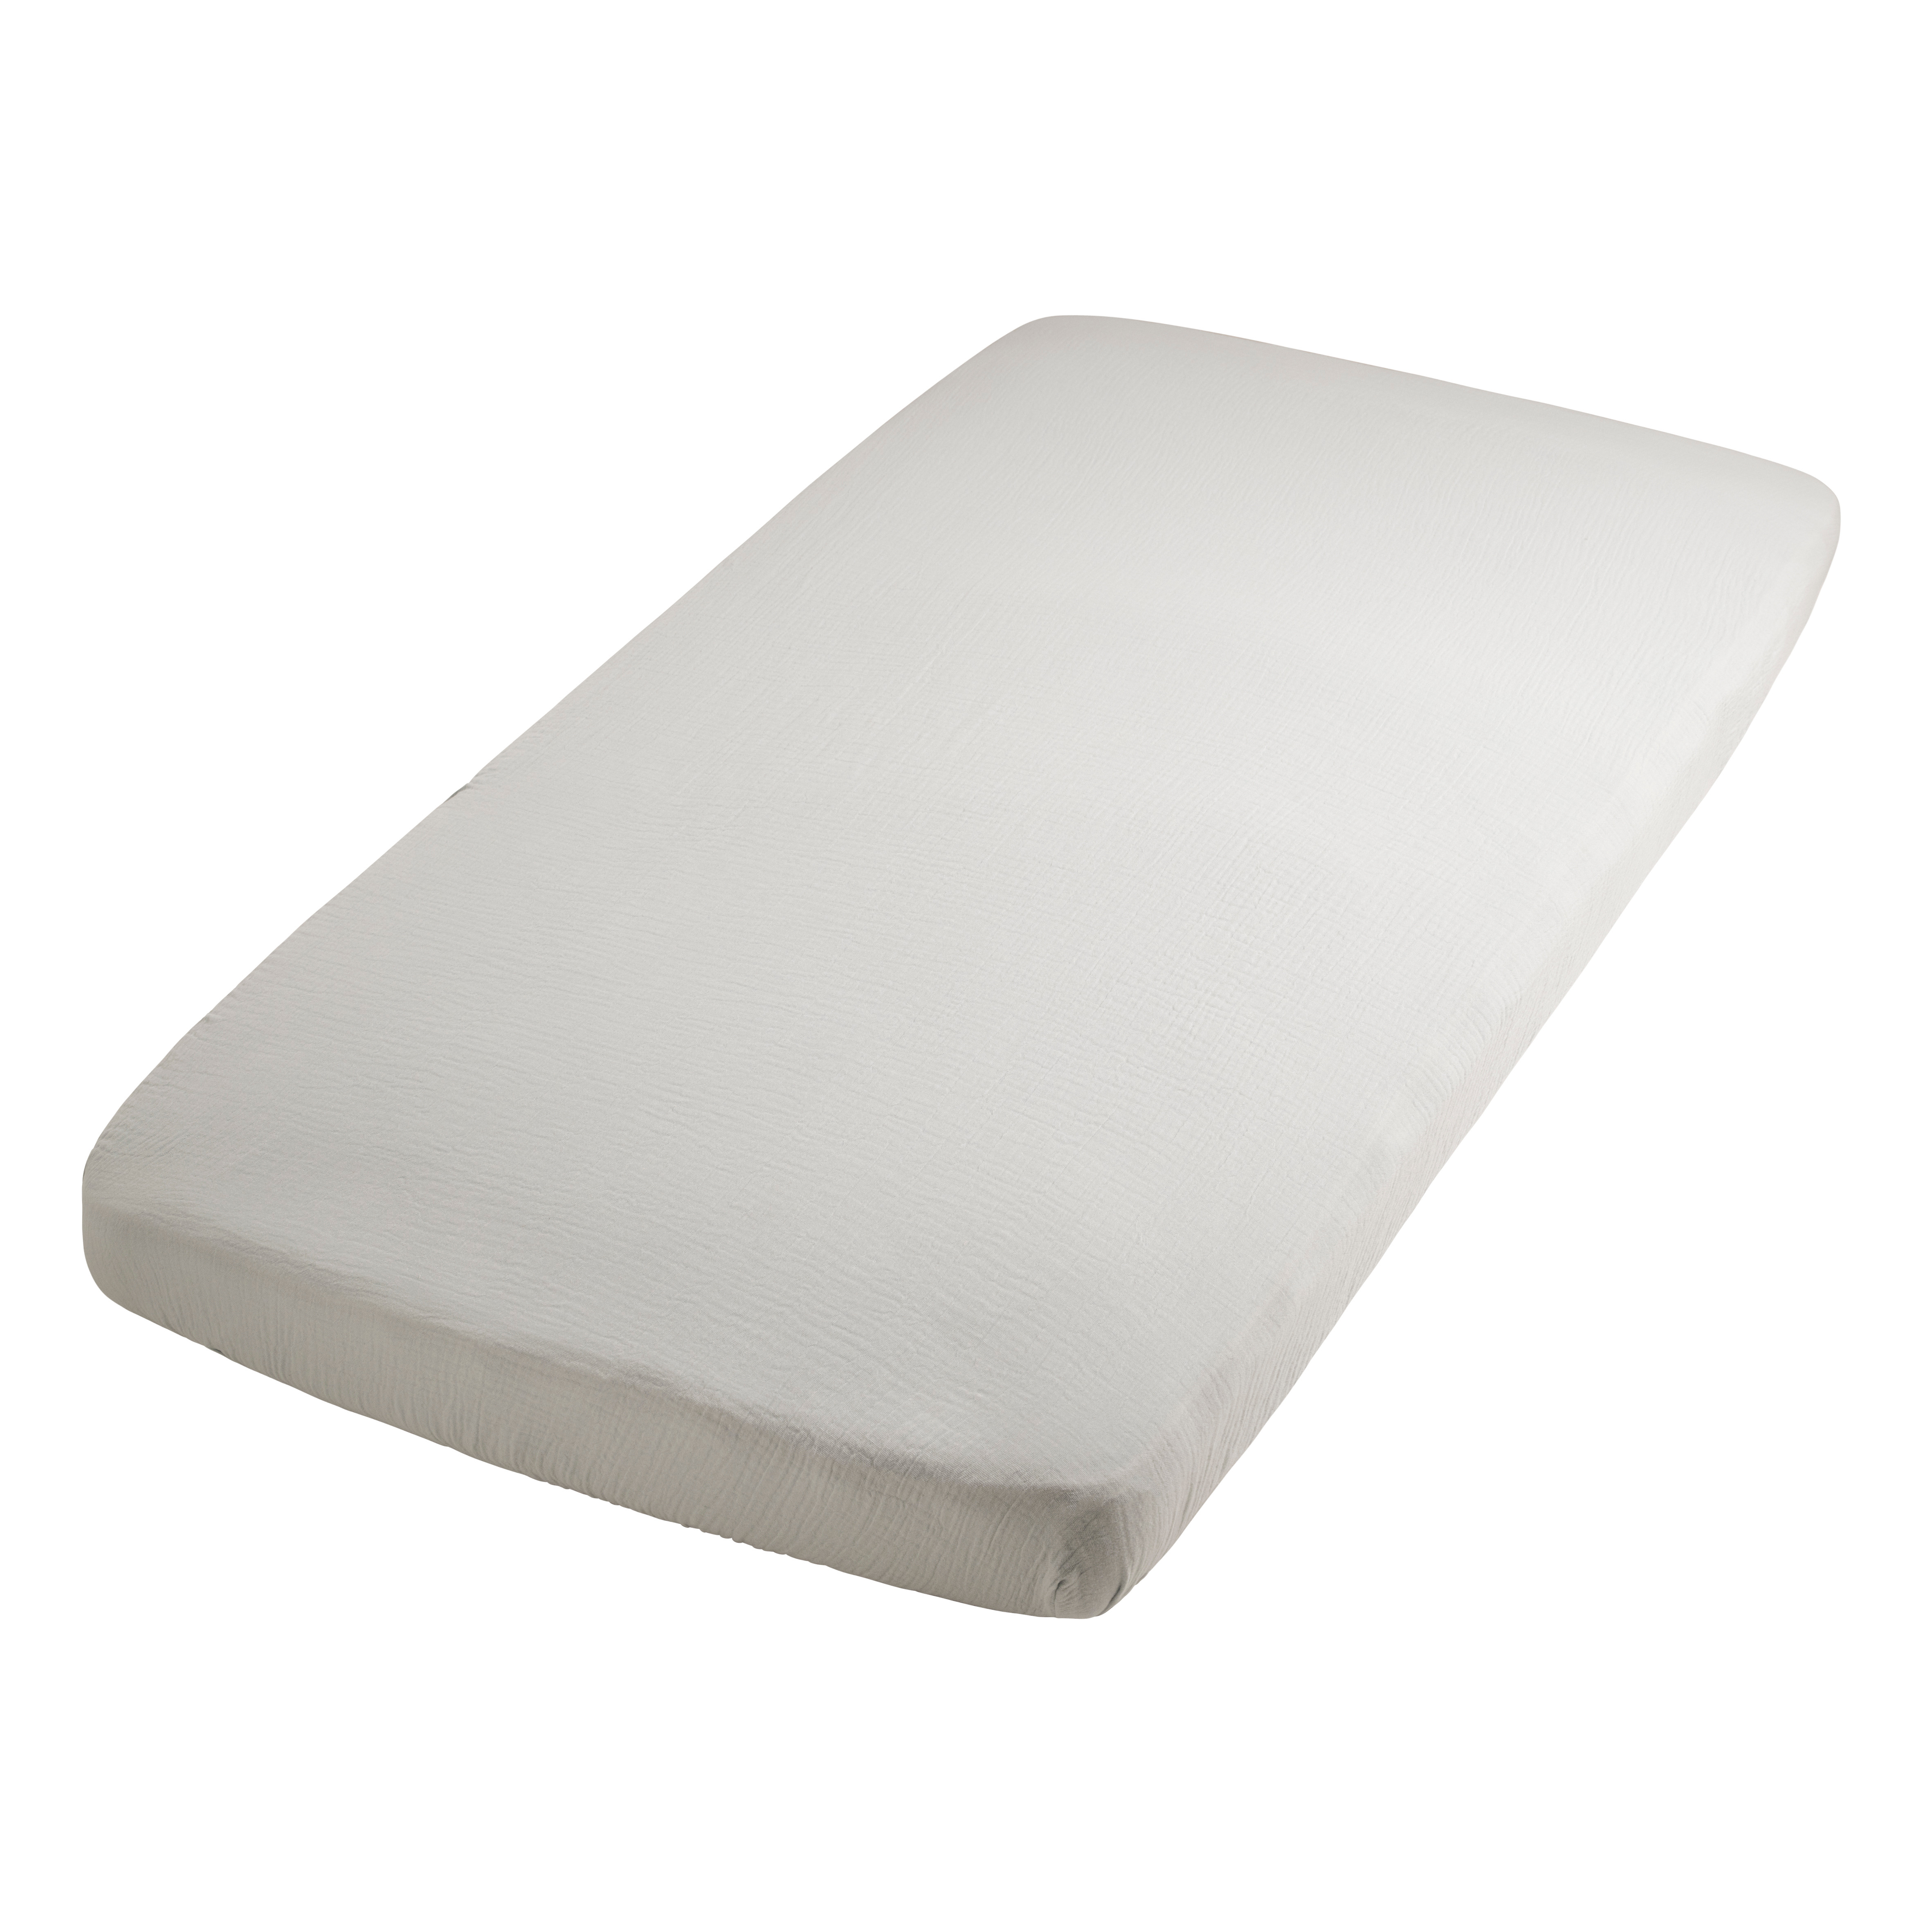 Fitted sheet Fresh ECO urban taupe - 60x120